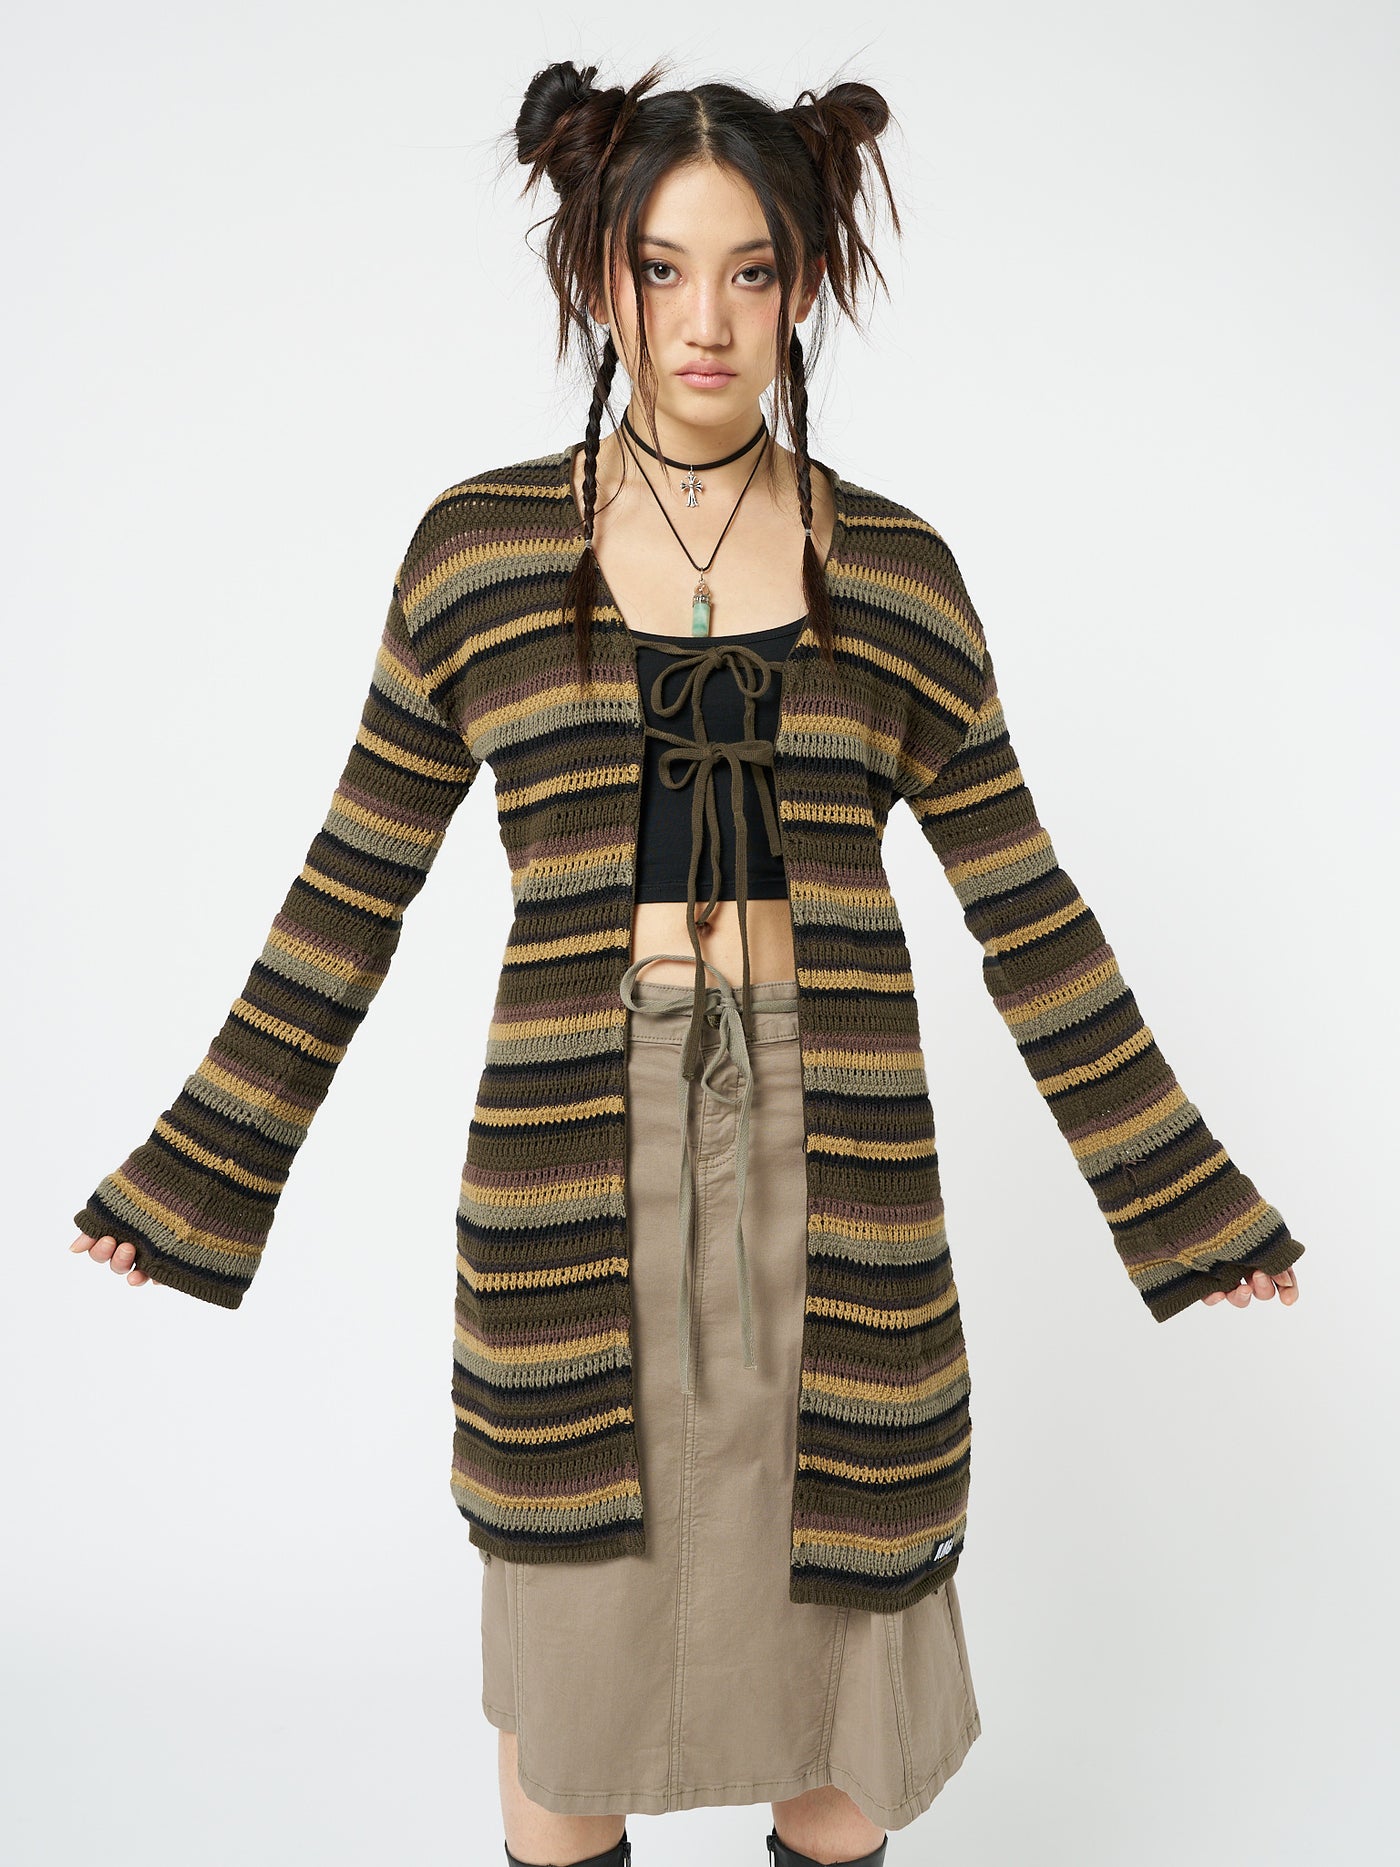 Embrace nature-inspired style with this forest striped knit cardigan featuring a trendy tie front detail.